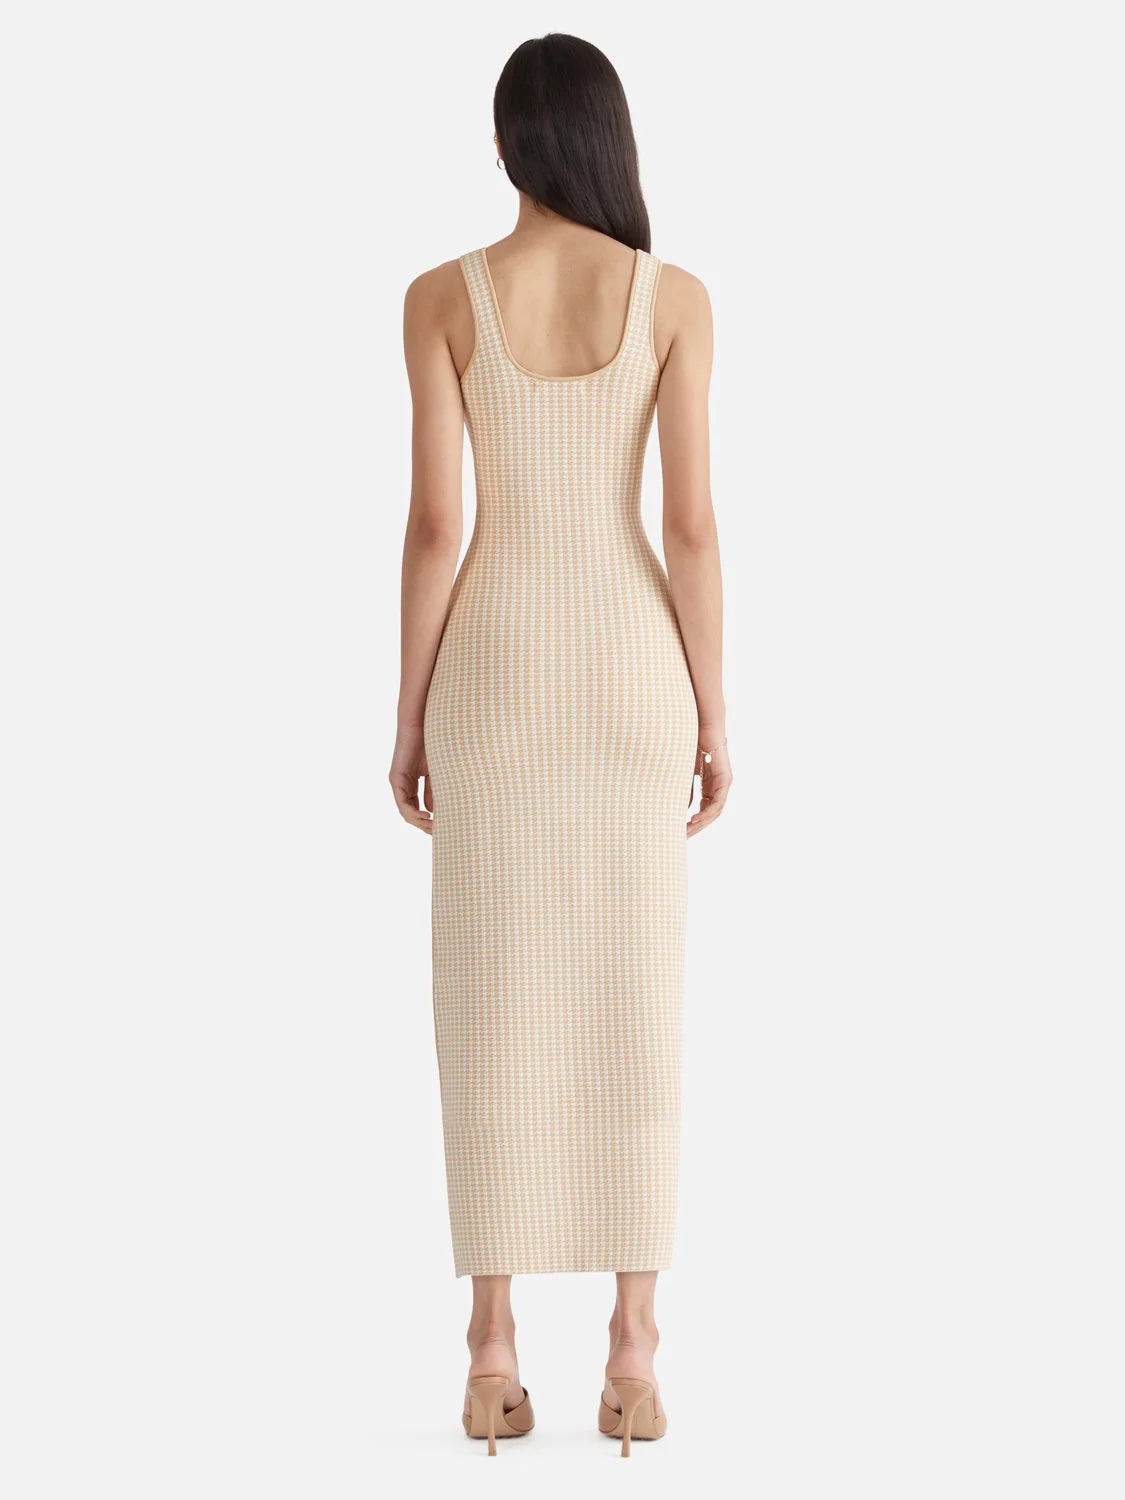 EVIE LUXE KNIT MAXI DRESS